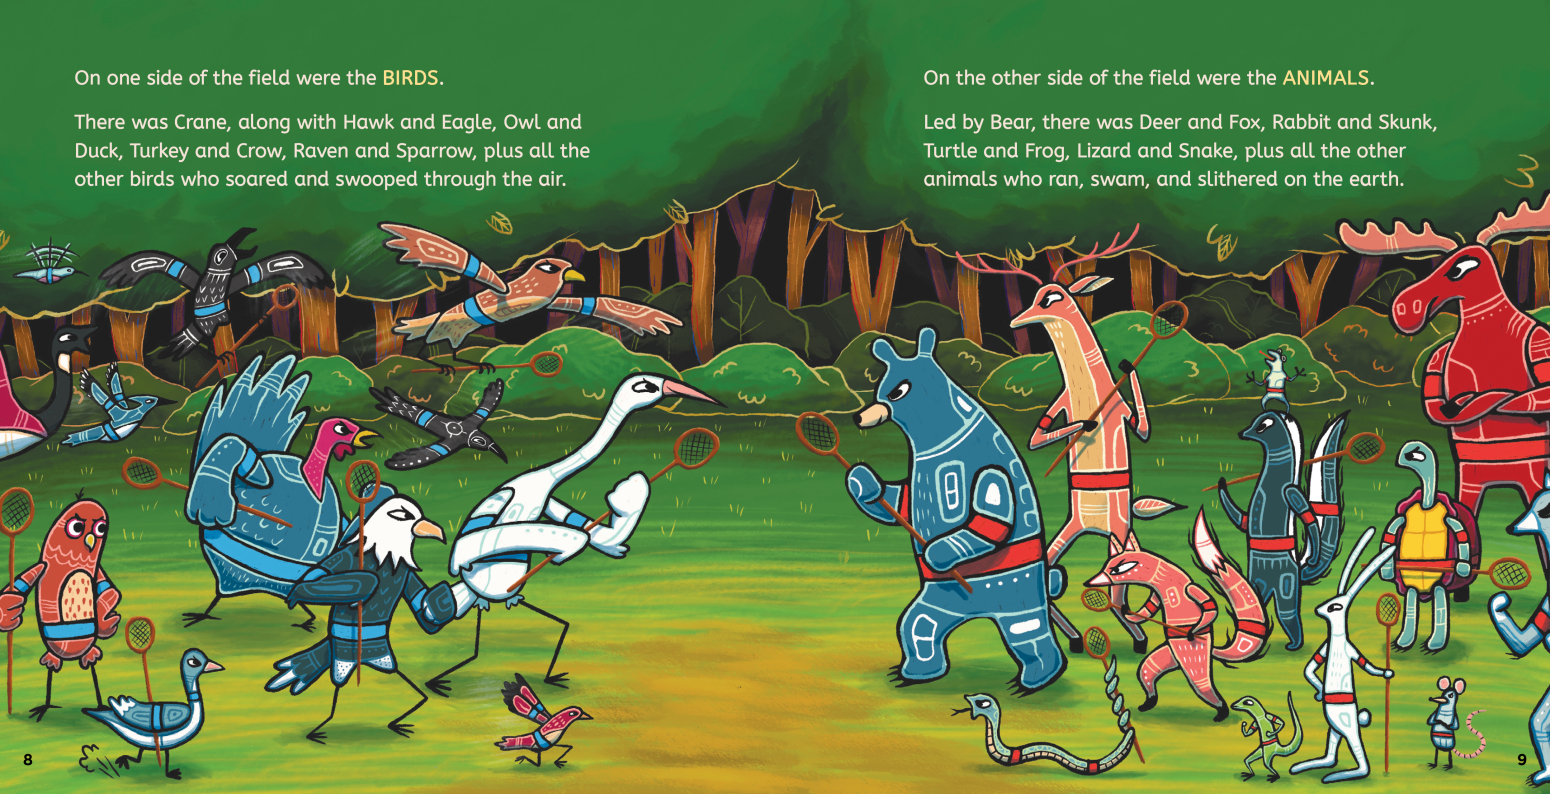 A standoff in a forest, with birds on the left side and animals on the ride side. Both groups glare at each other.